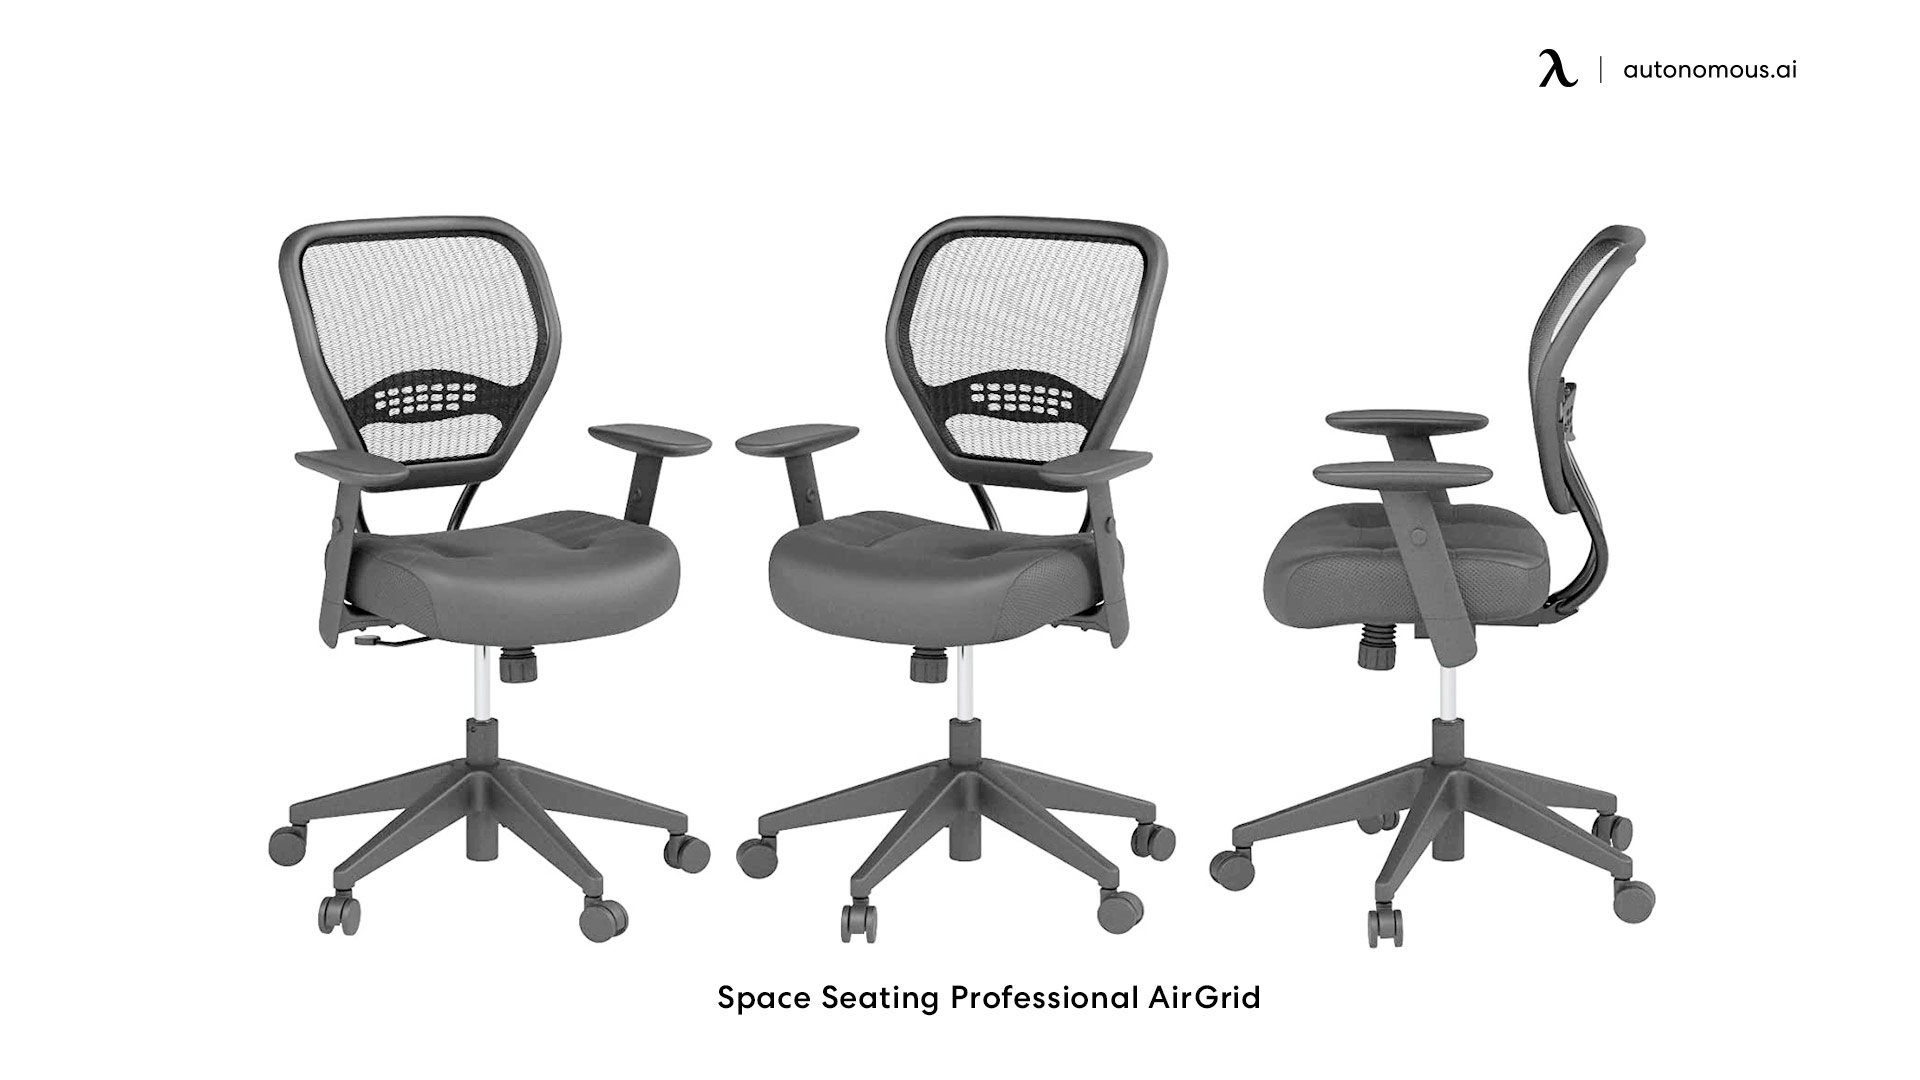 Professional AirGrid office chair deals